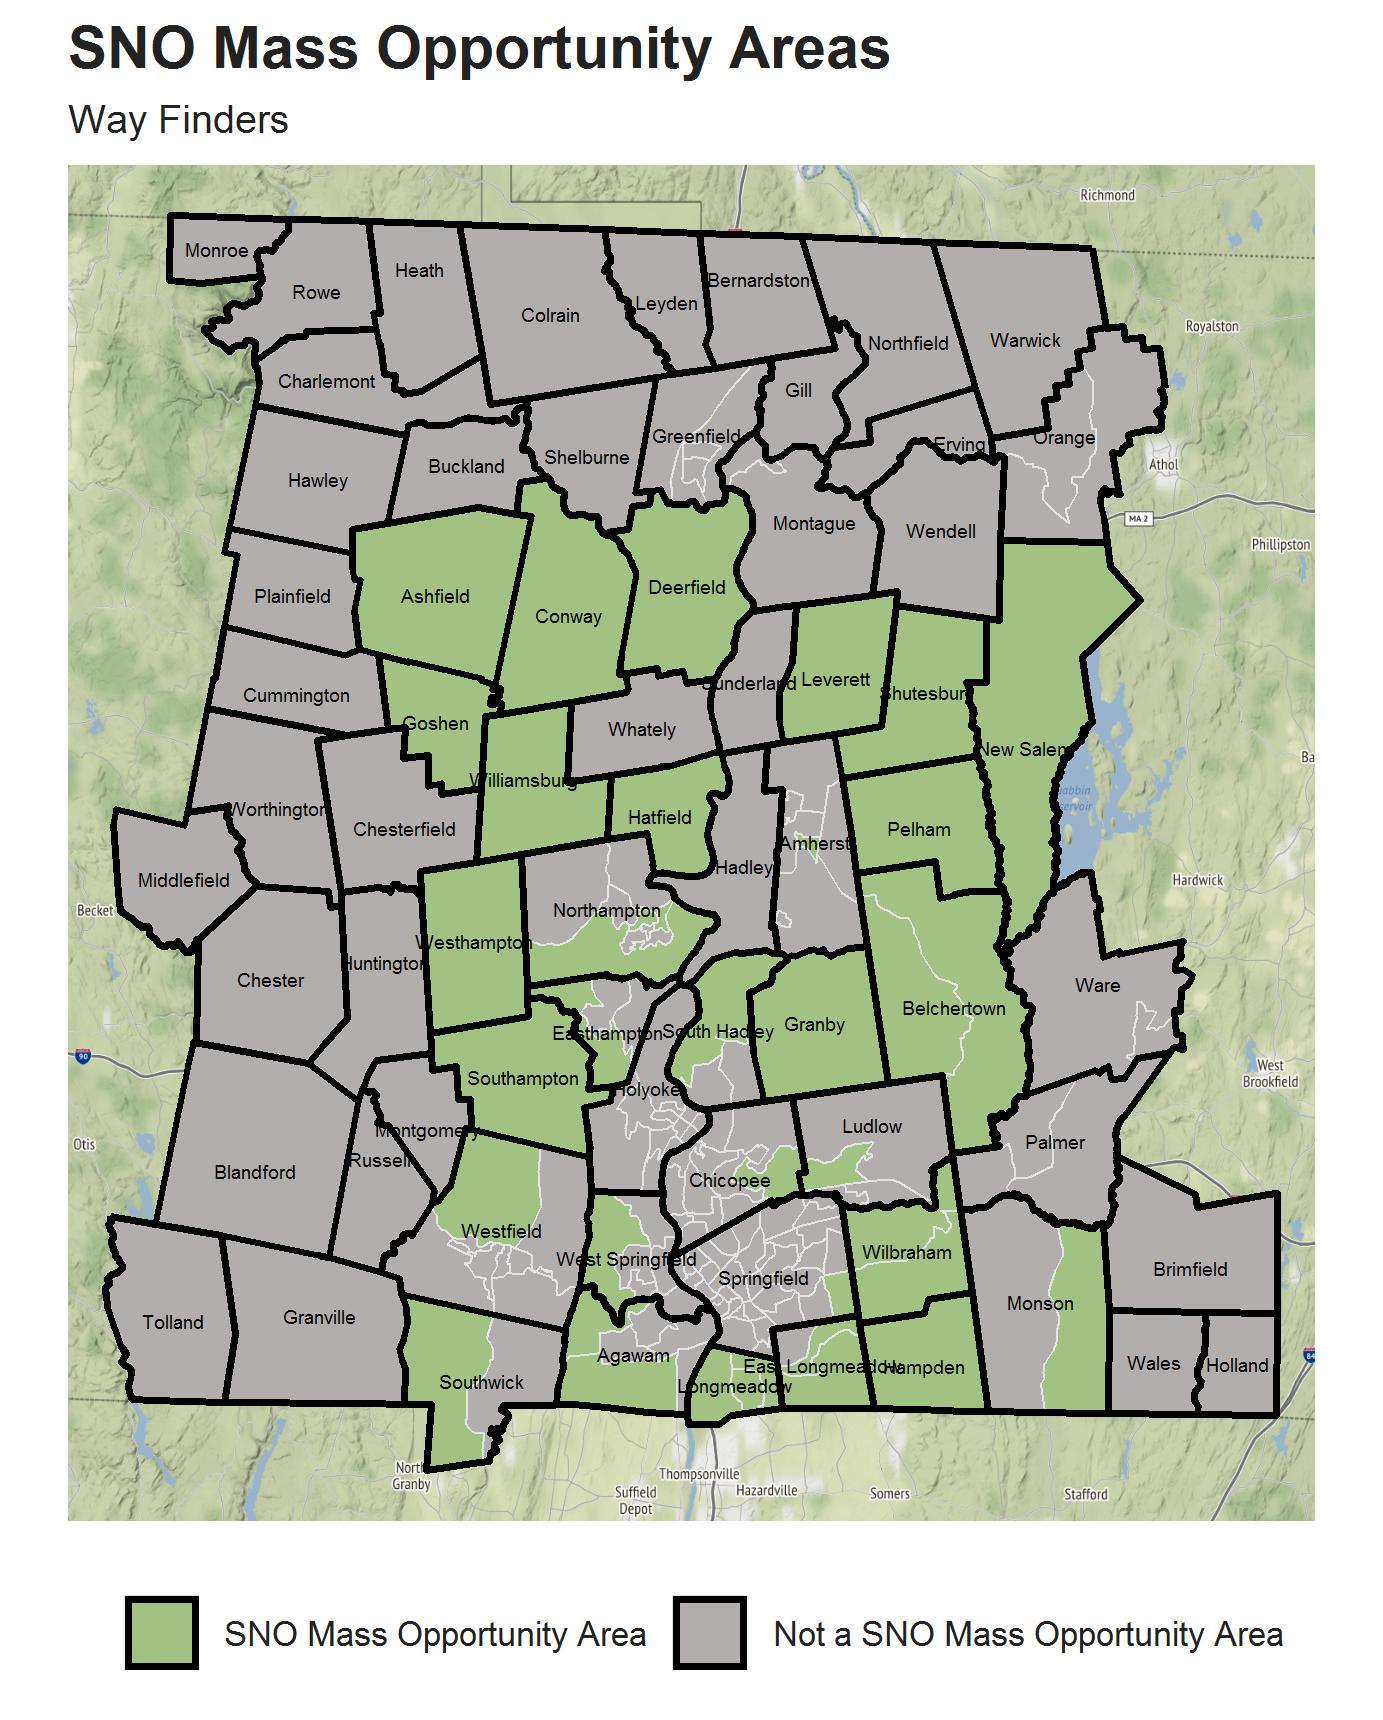 SNO Mass Map of Hampden, Hampshire and Franklin Counties that highlights opportunity areas within the region